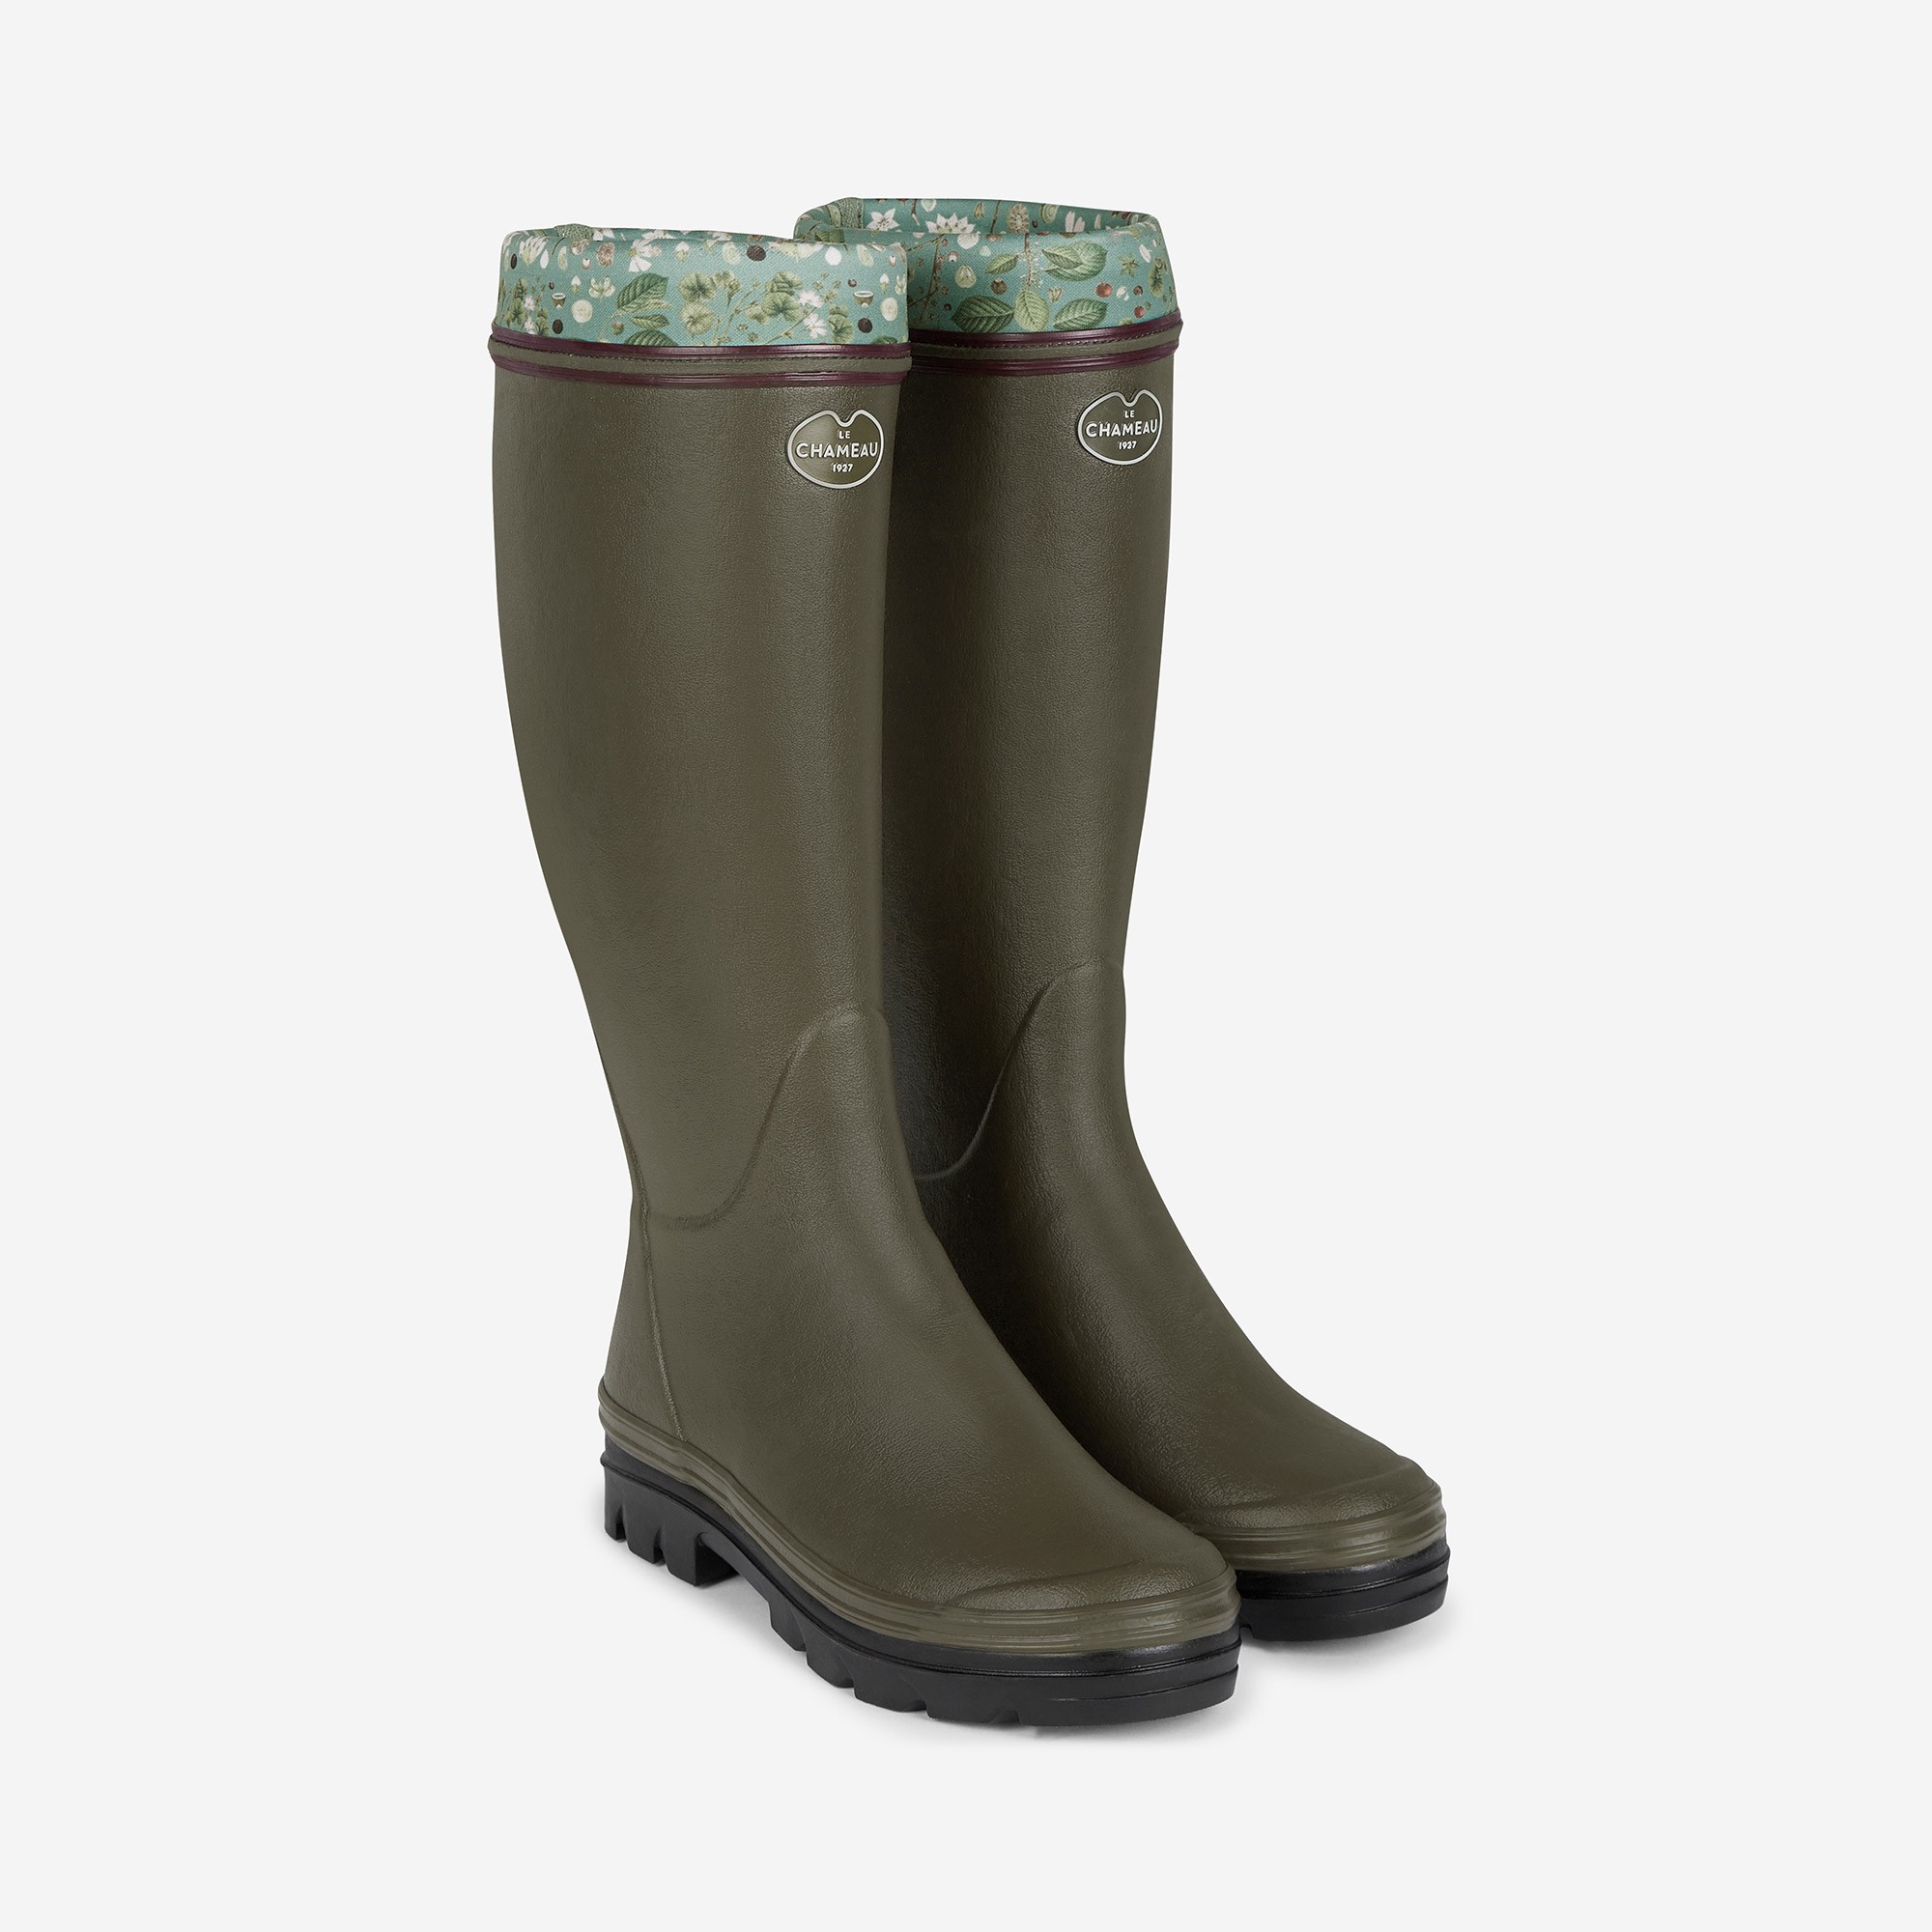 Le Chameau Giverny Kew Gardens Ladies Wellington Boots Green